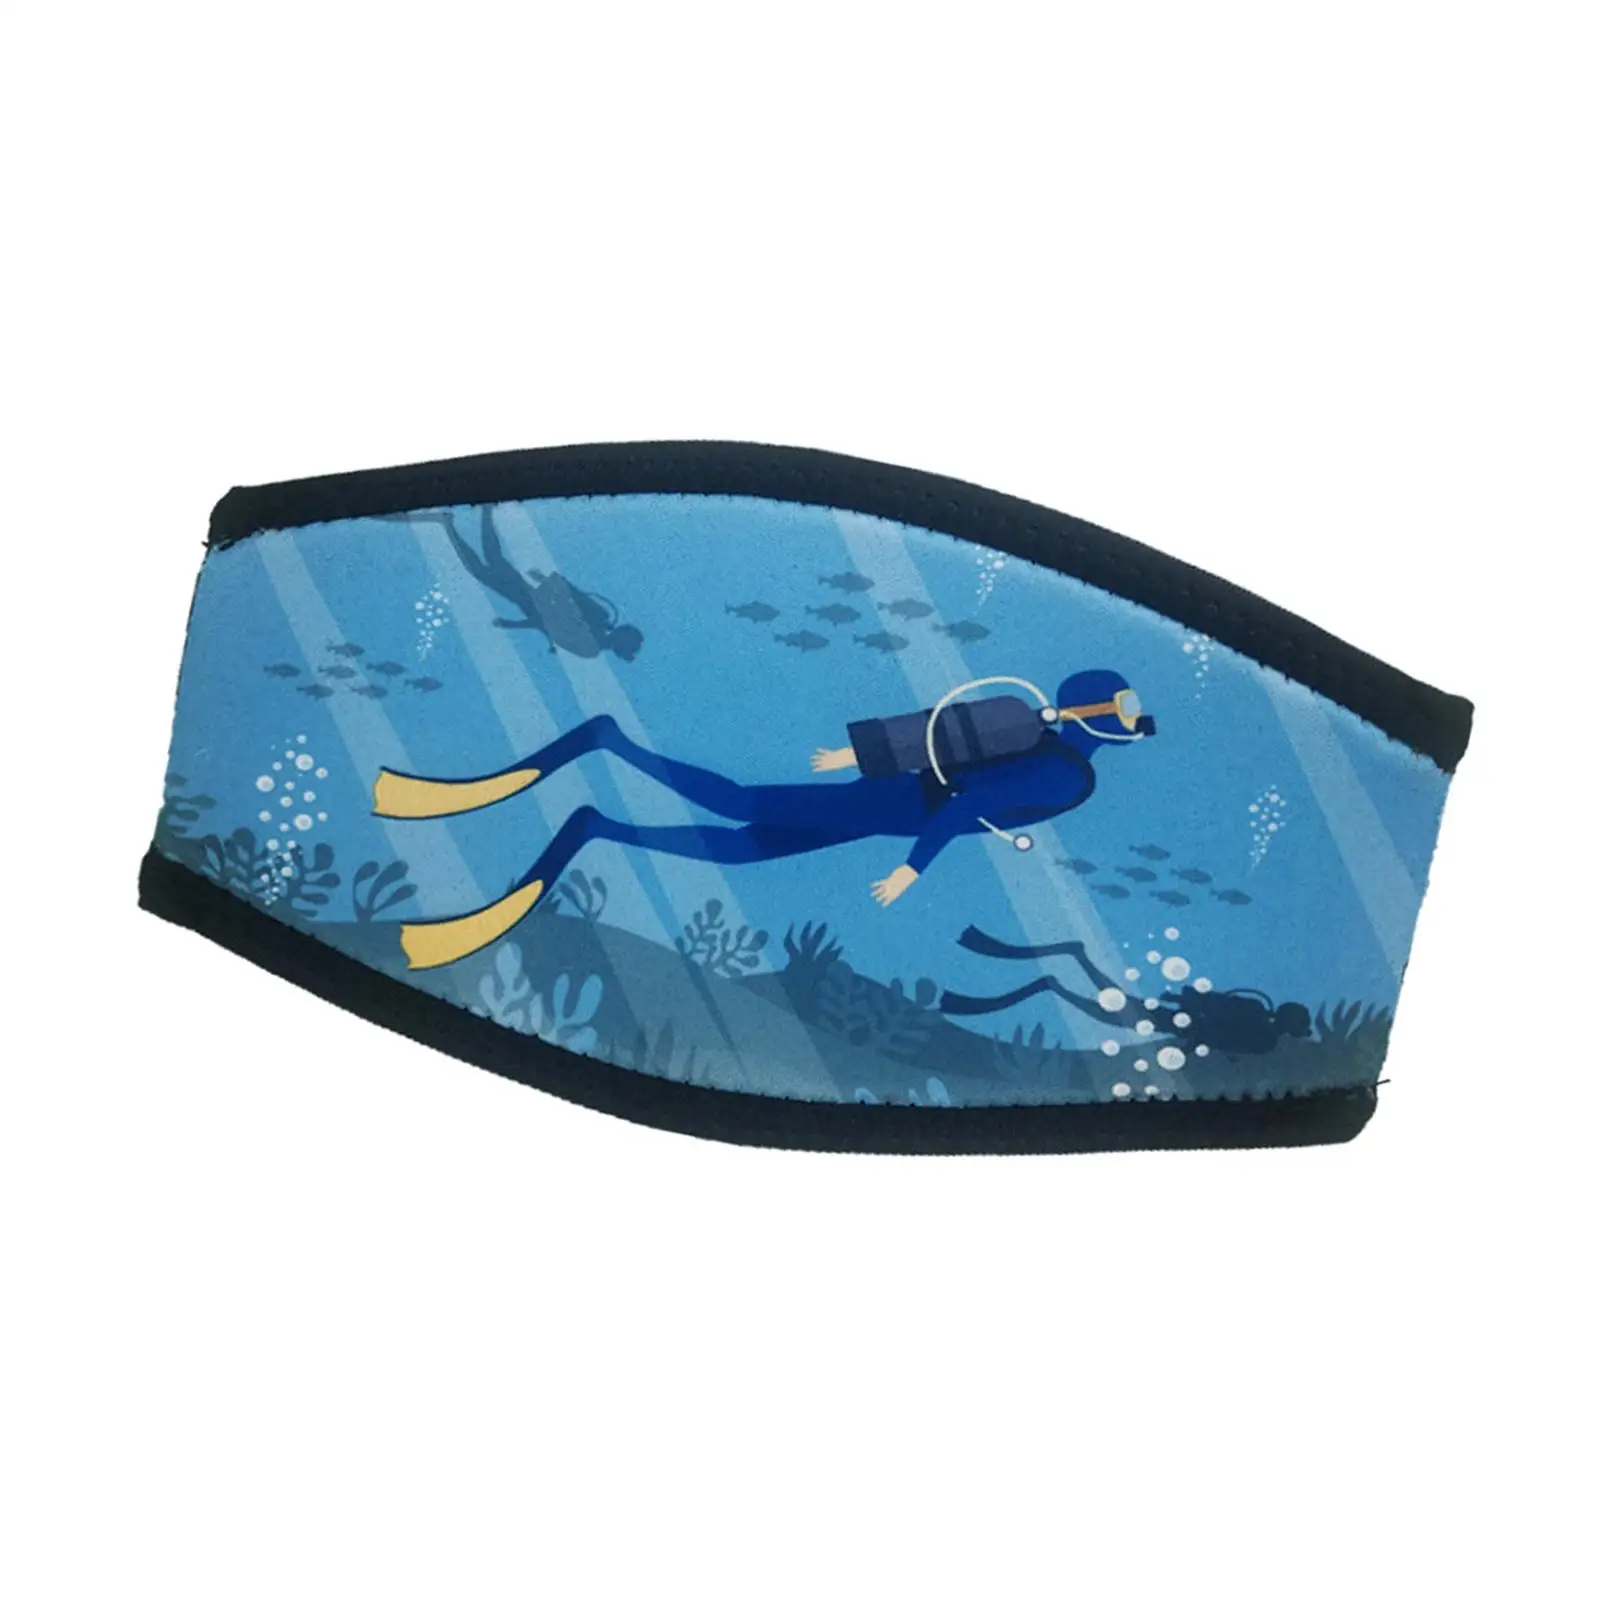 Diving Mask Strap Cover Replacement Accessories Soft Neoprene for Surfing